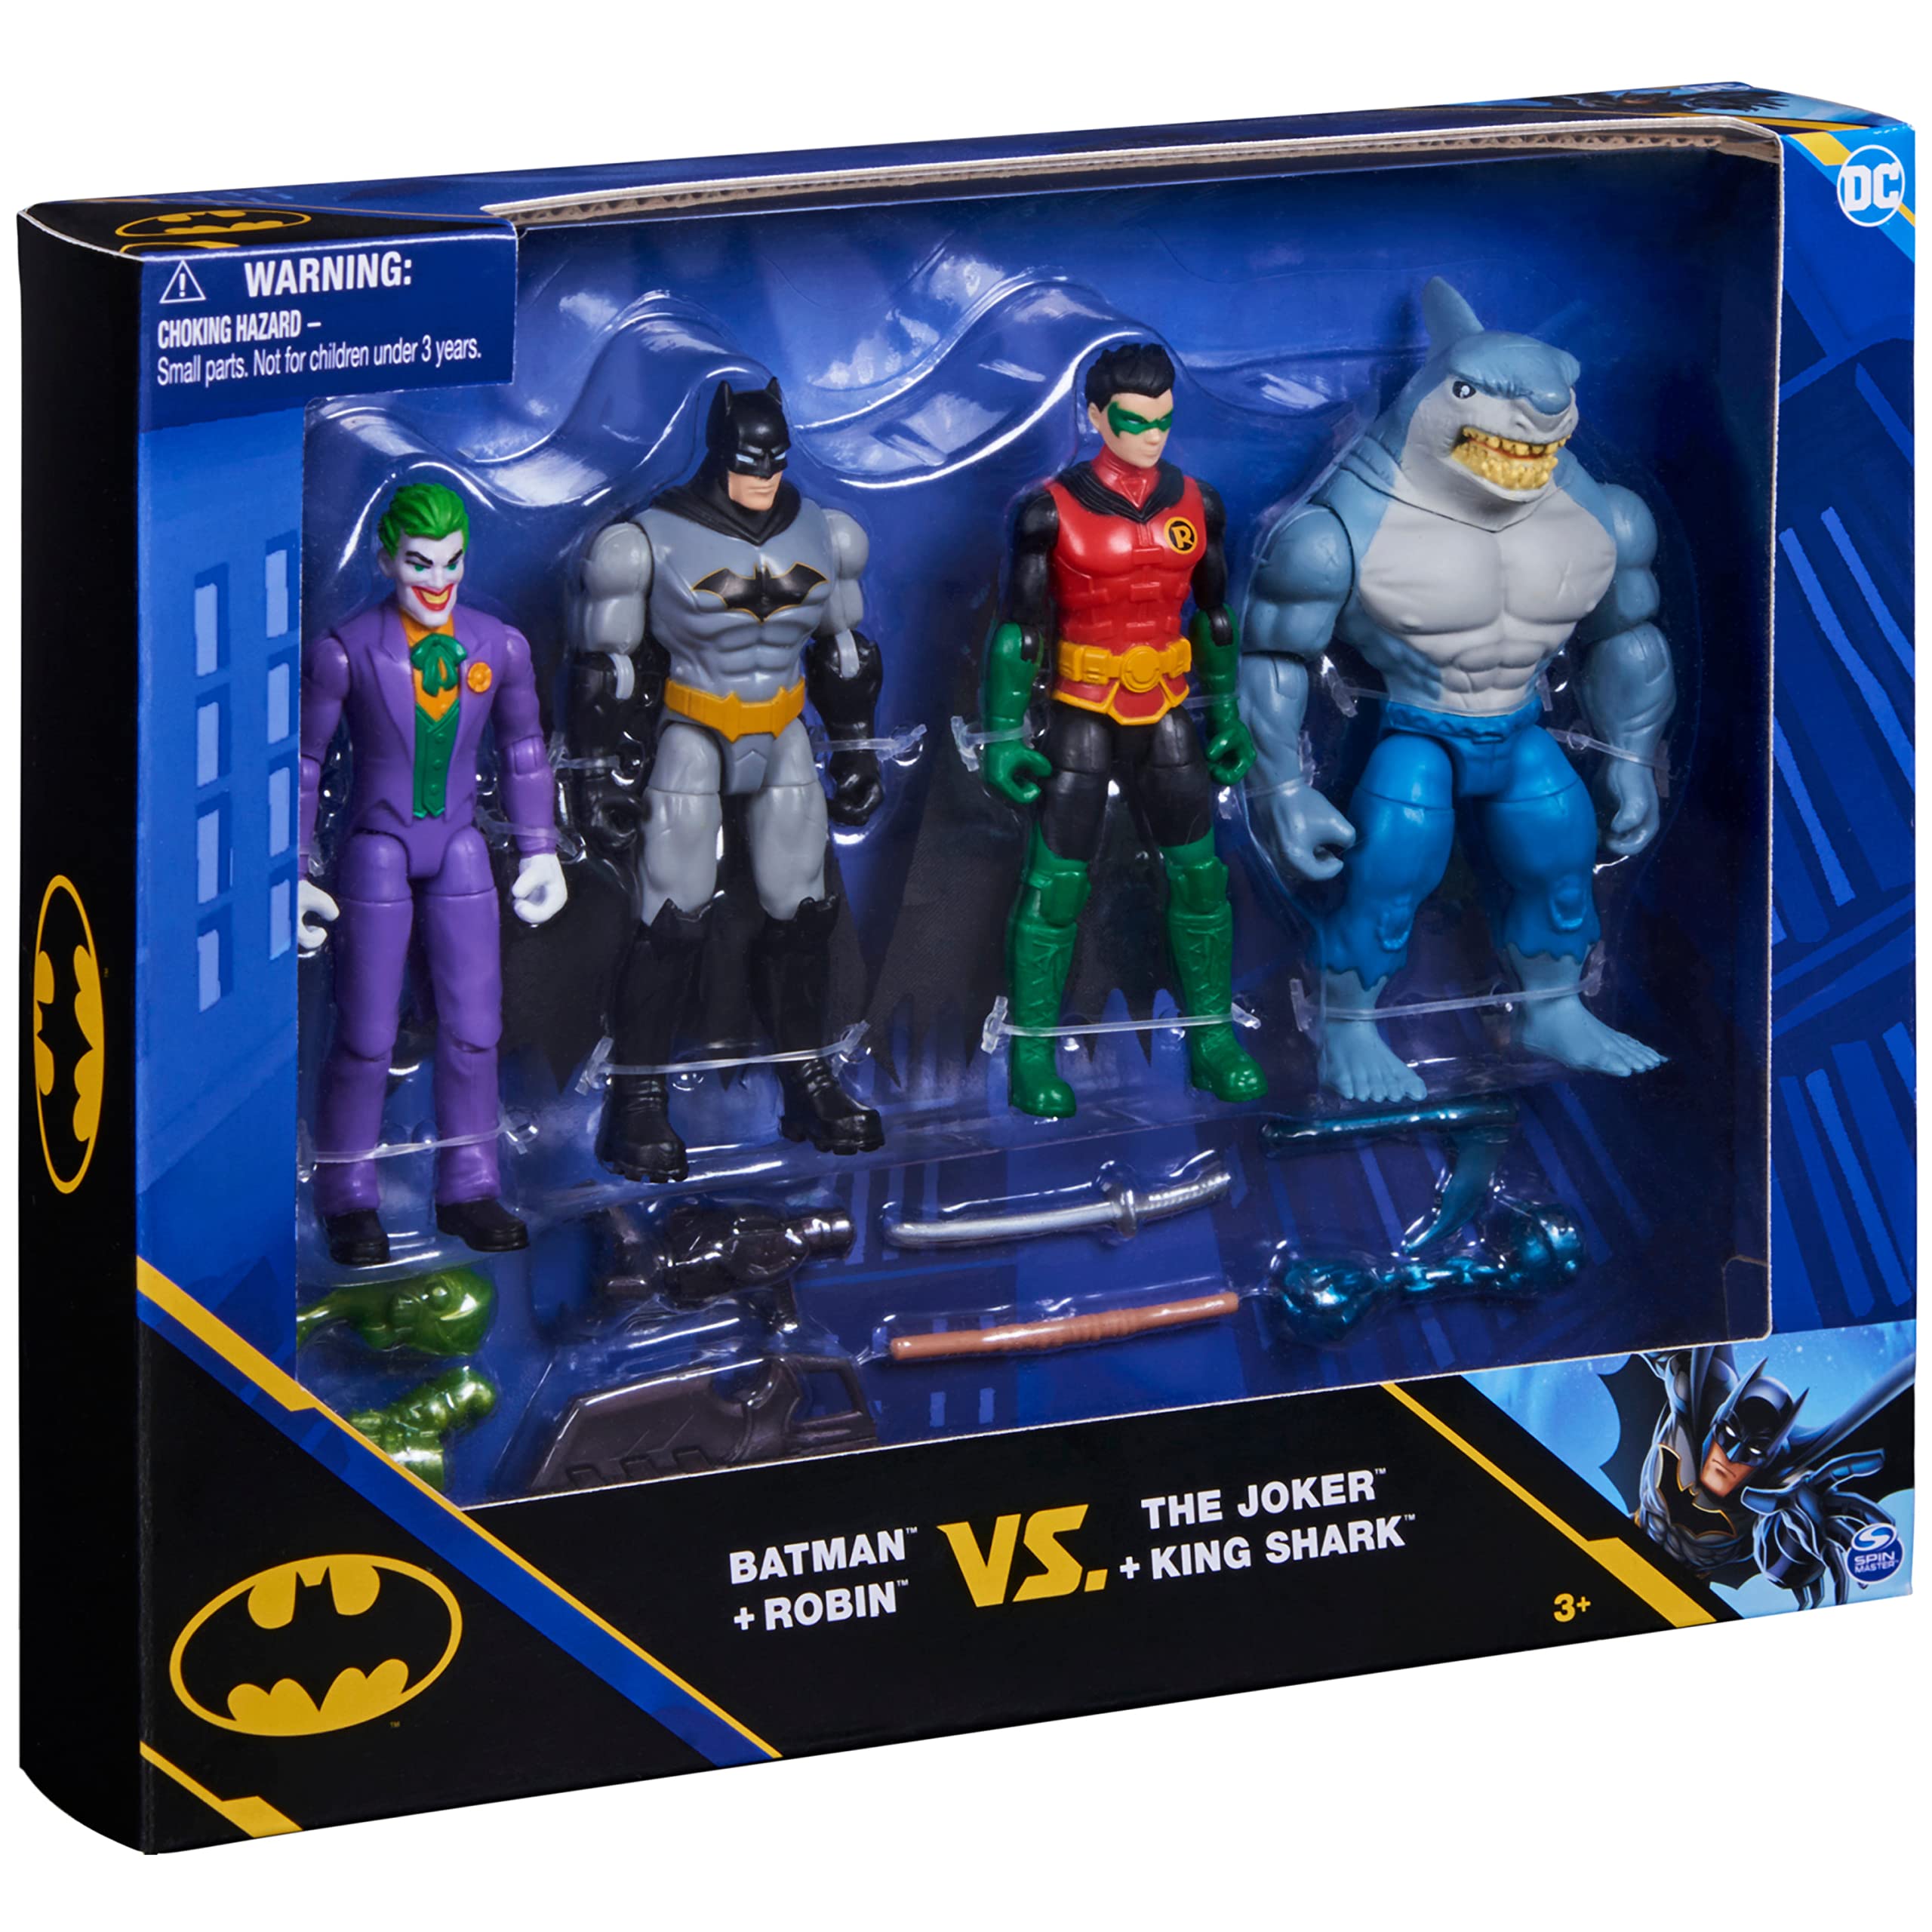 DC Comics, Batman and Robin vs. The Joker and King Shark, 4-inch Action Figures, Kids Toys for Boys and Girls Ages 3 and Up